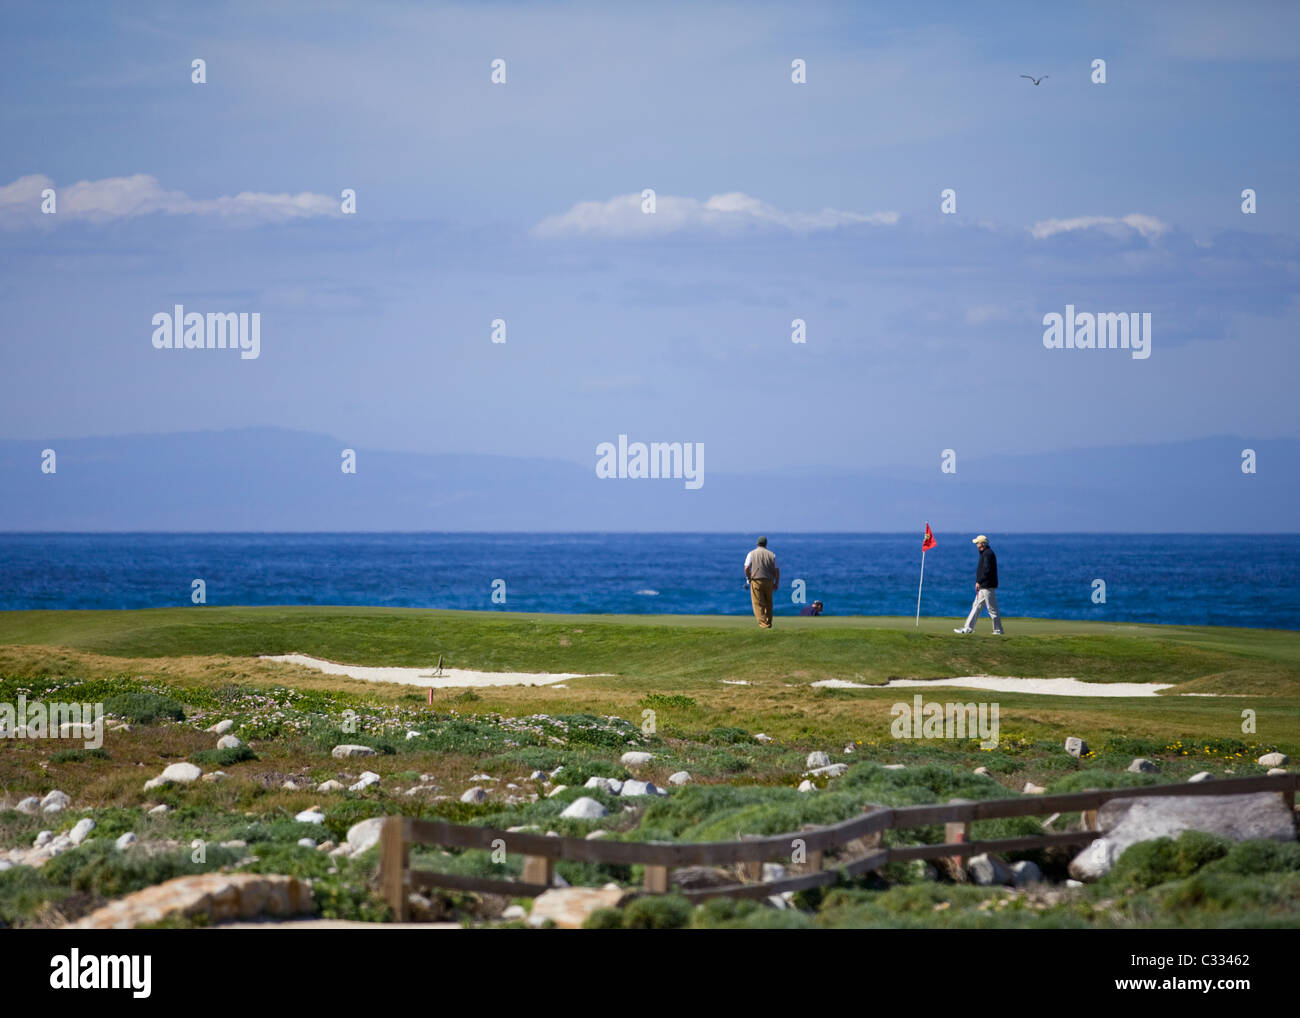 Golfers on putting green on the famous oceanfront Pebble Beach golf course Stock Photo